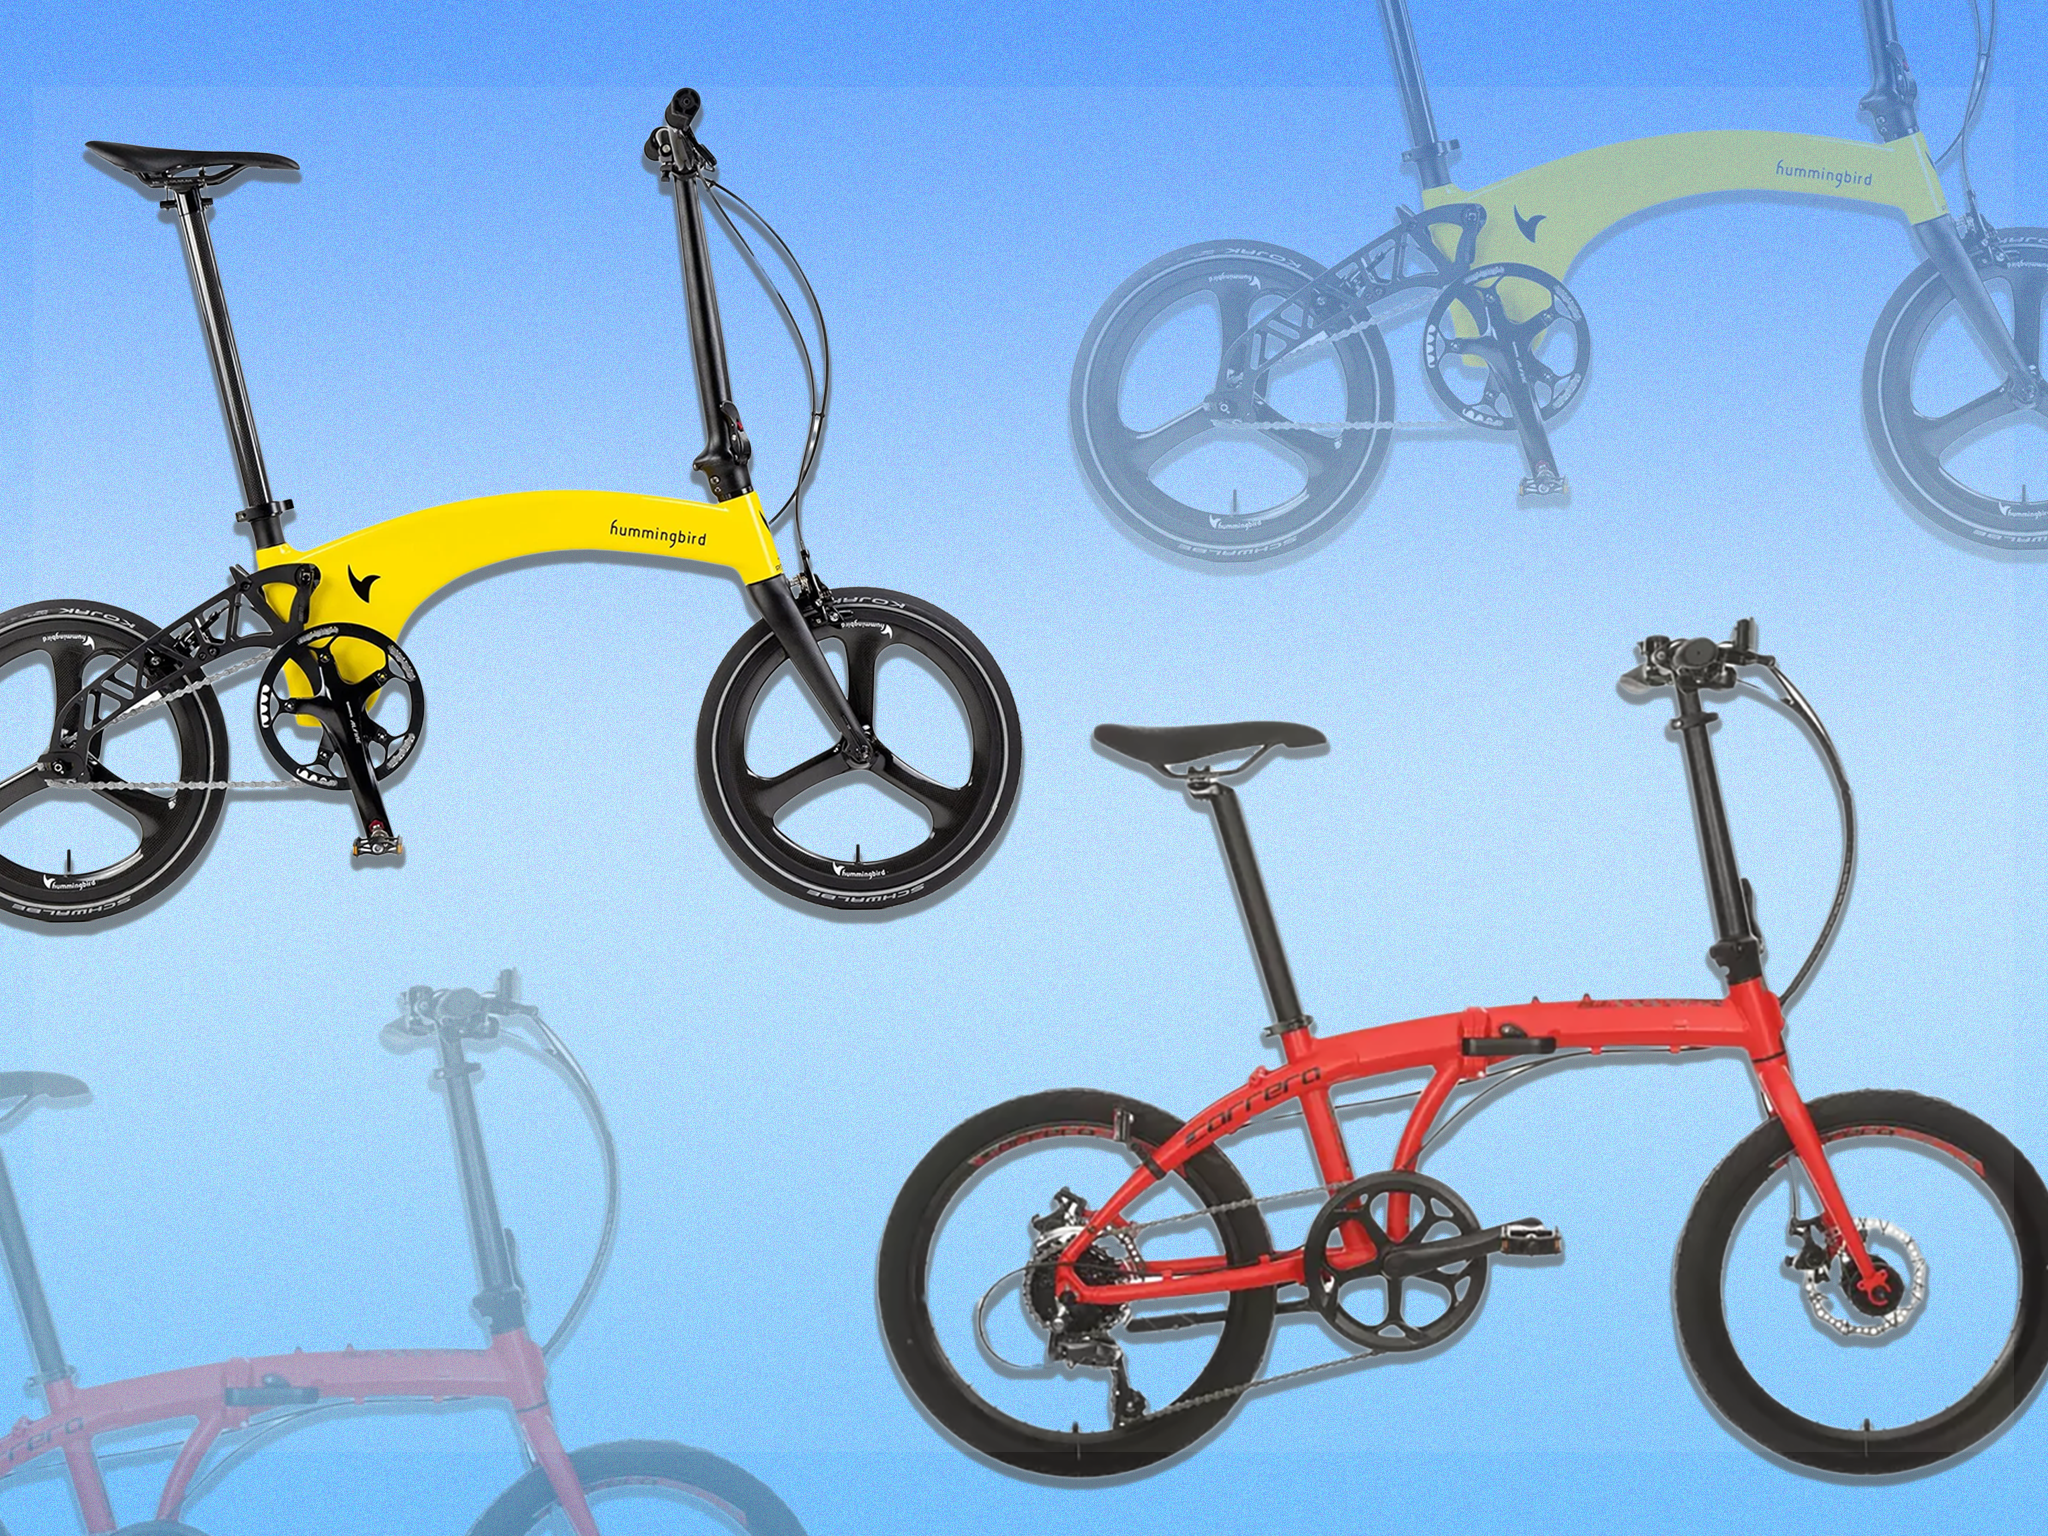 From electric to budget cycles, we’ve been zipping around to find the best folders out there